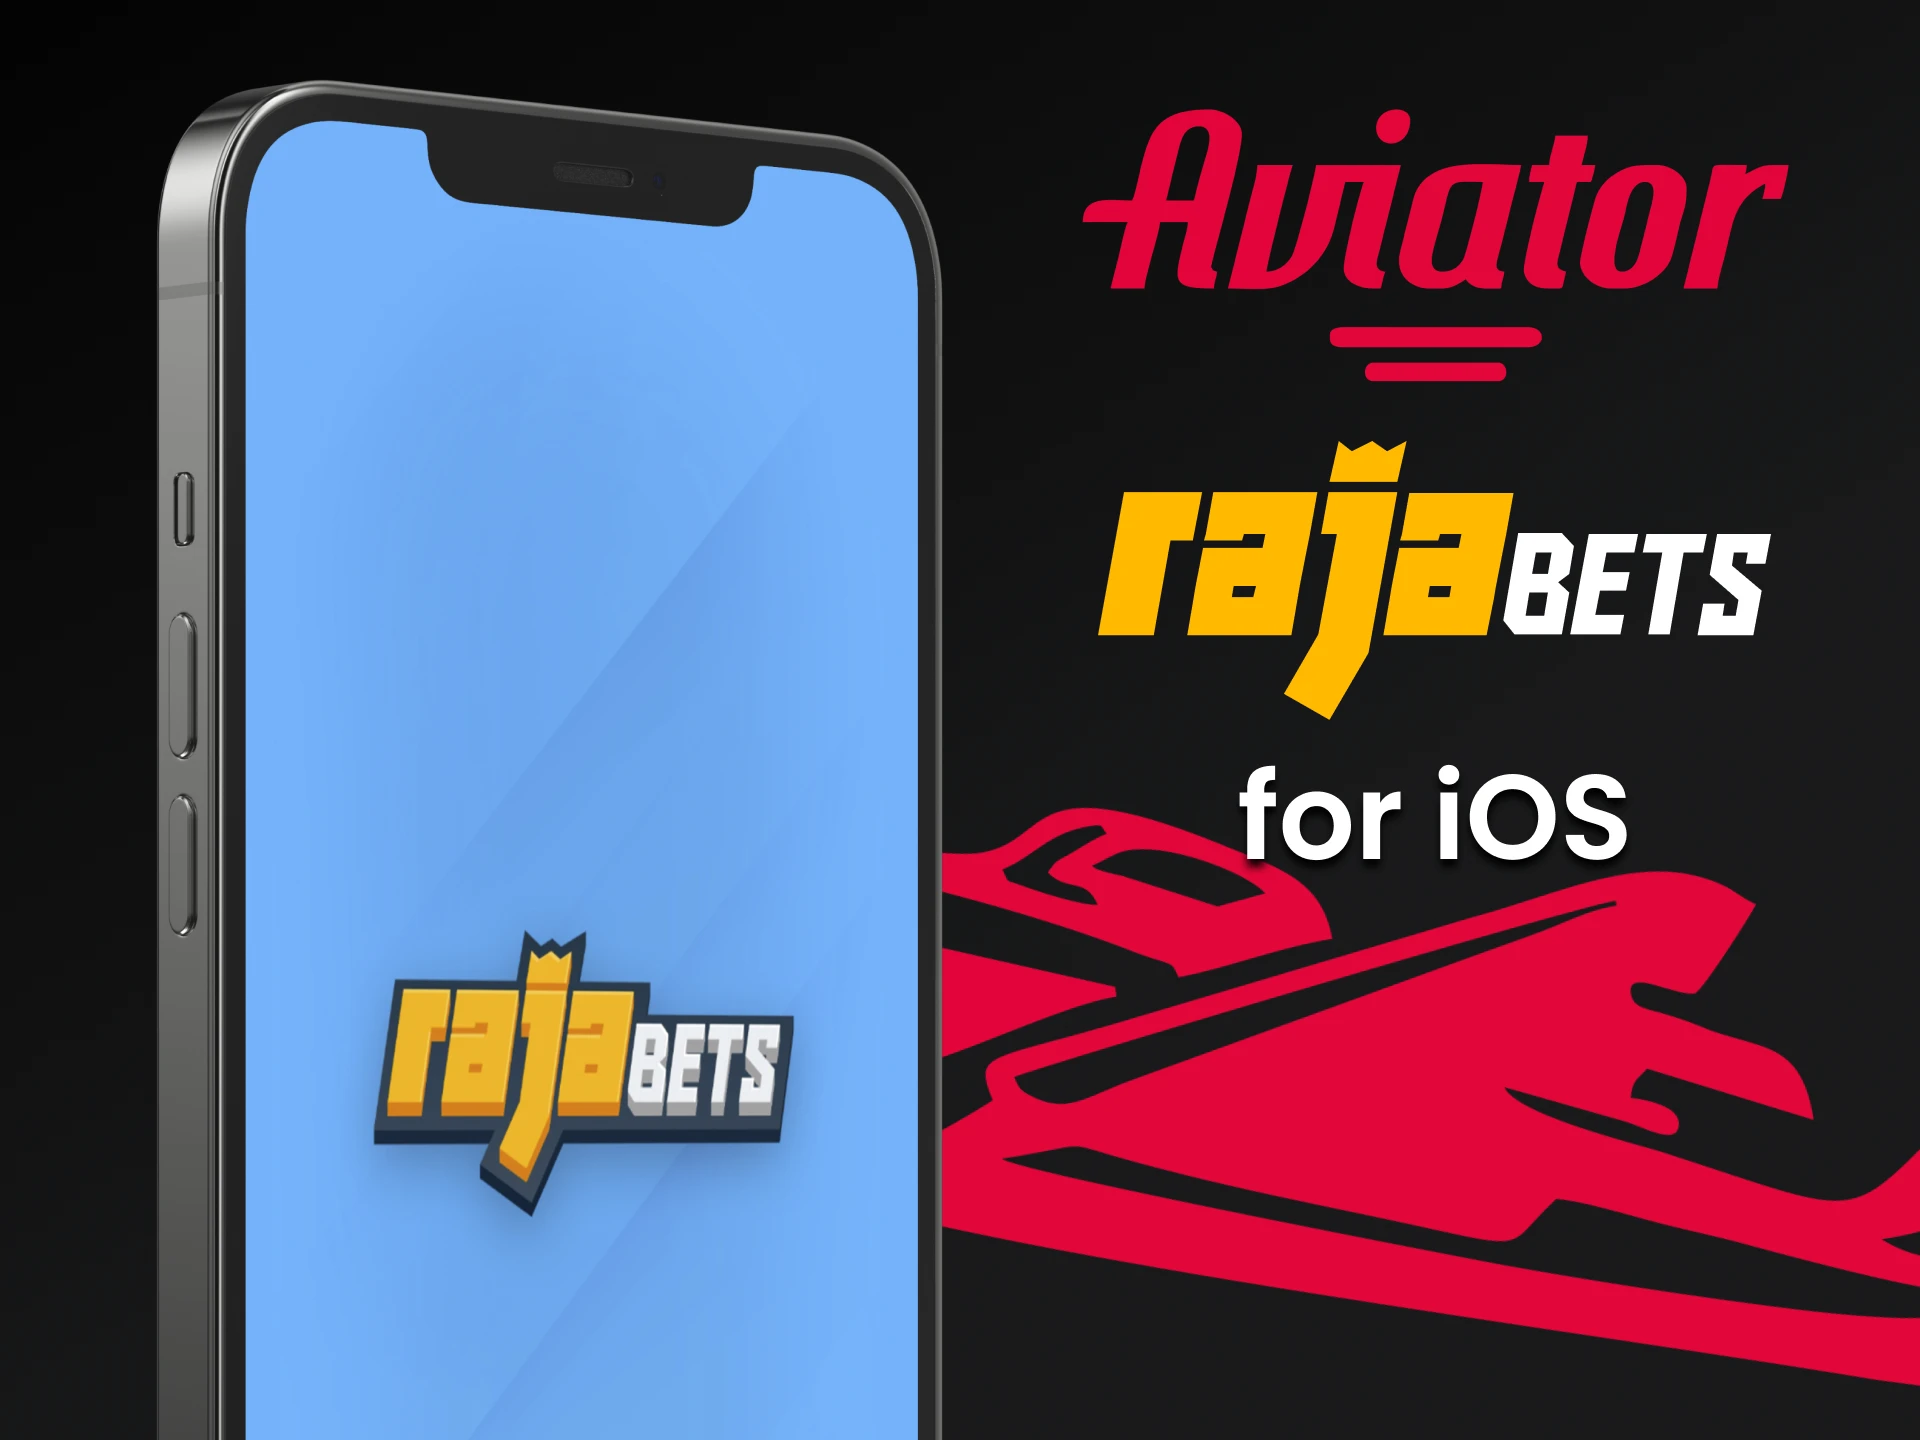 Install the application for iOS from Rajabets for Aviator.